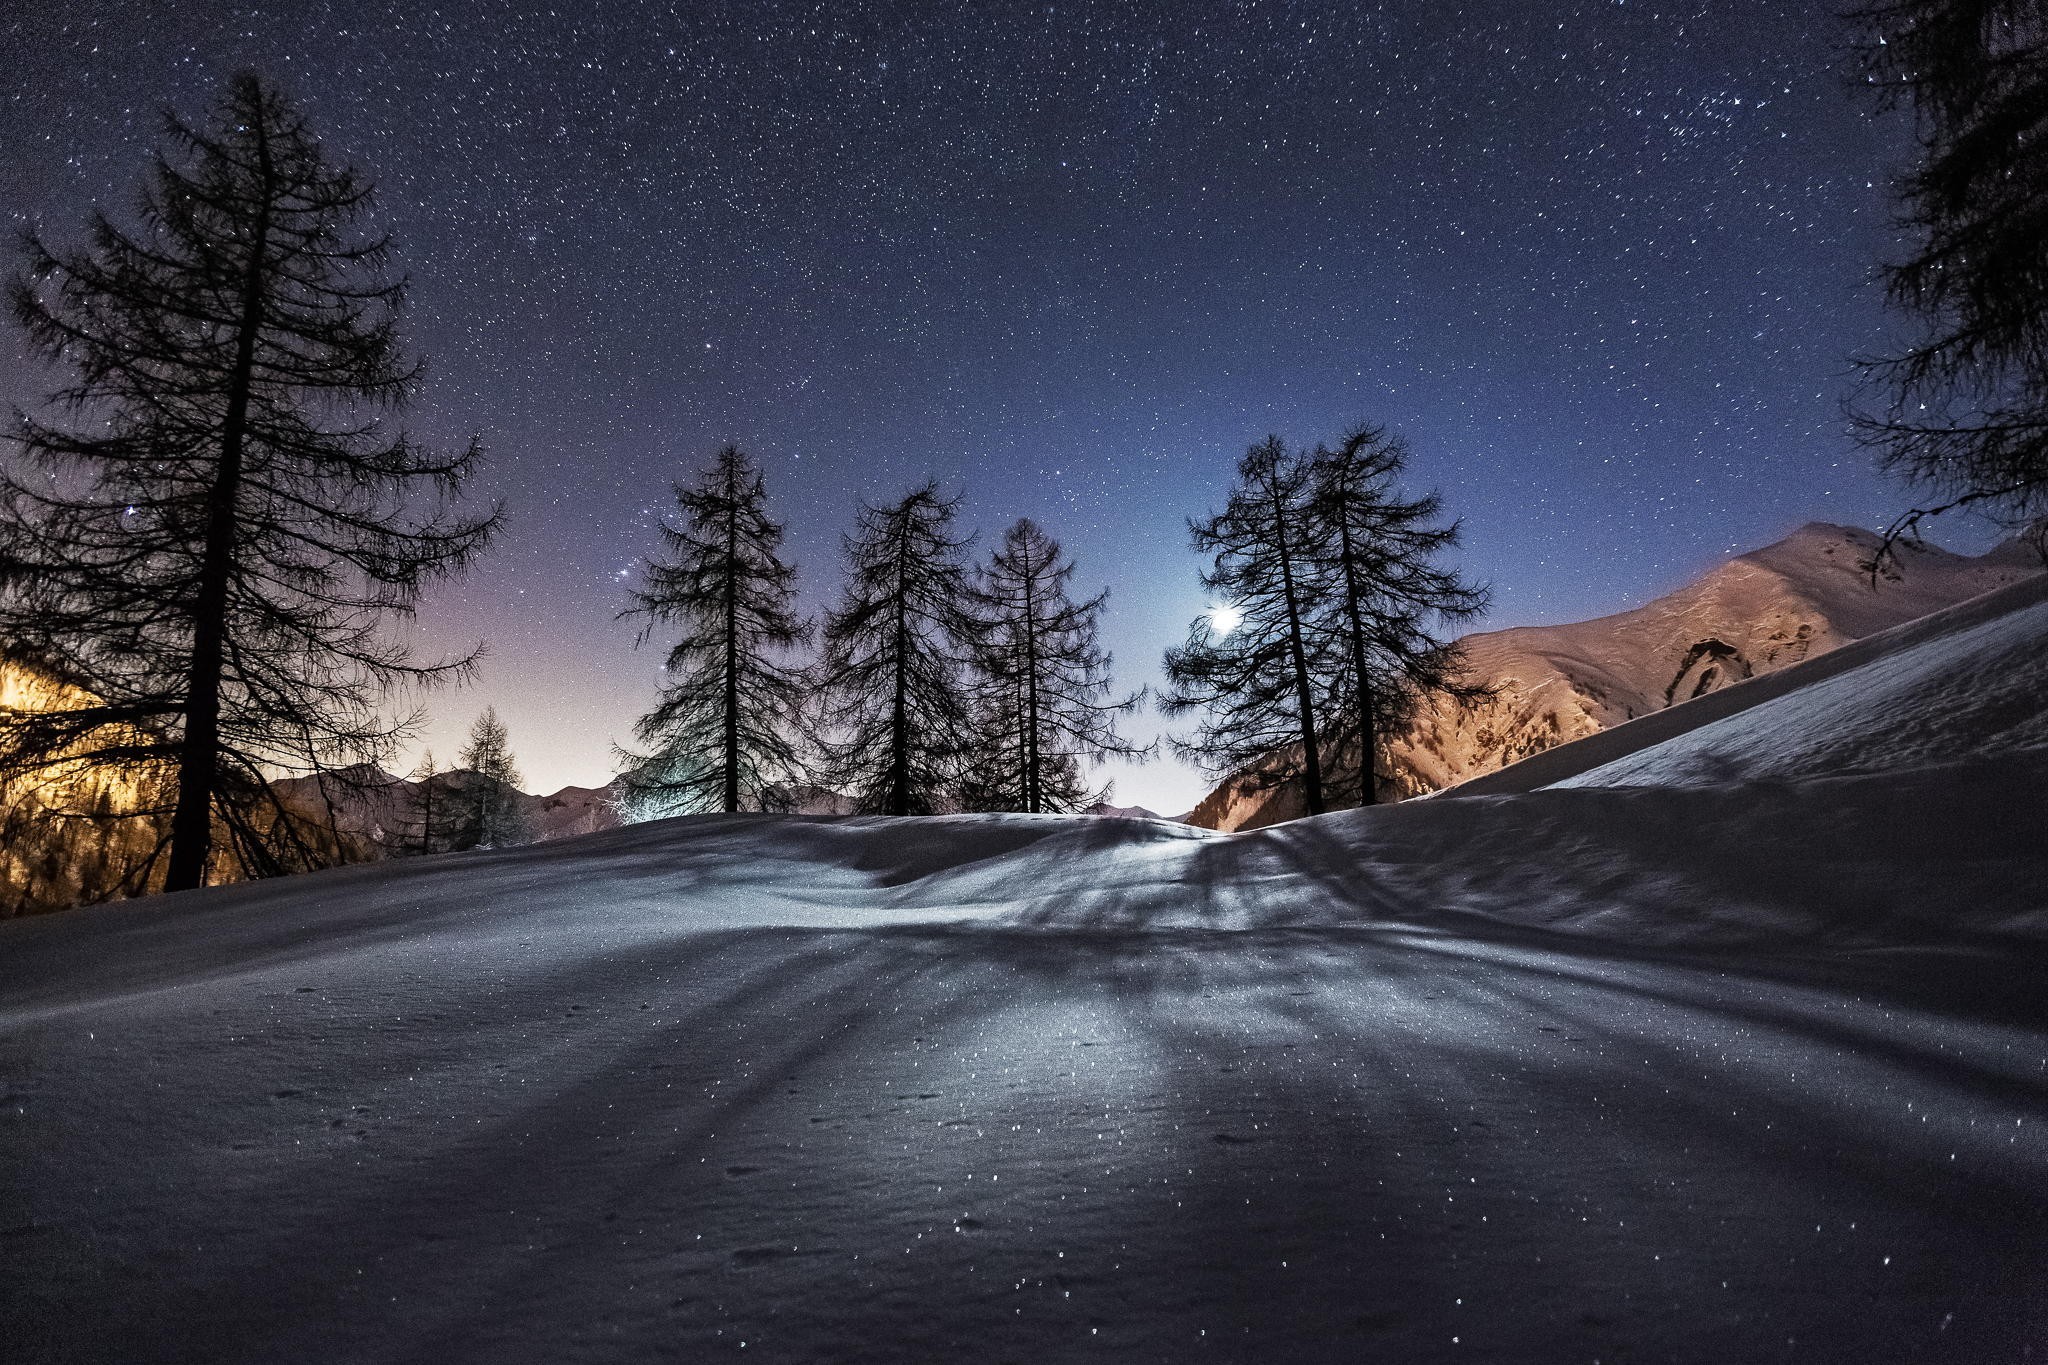 General 2048x1365 winter landscape night snow photography nature trees mountains Moon sky stars low light